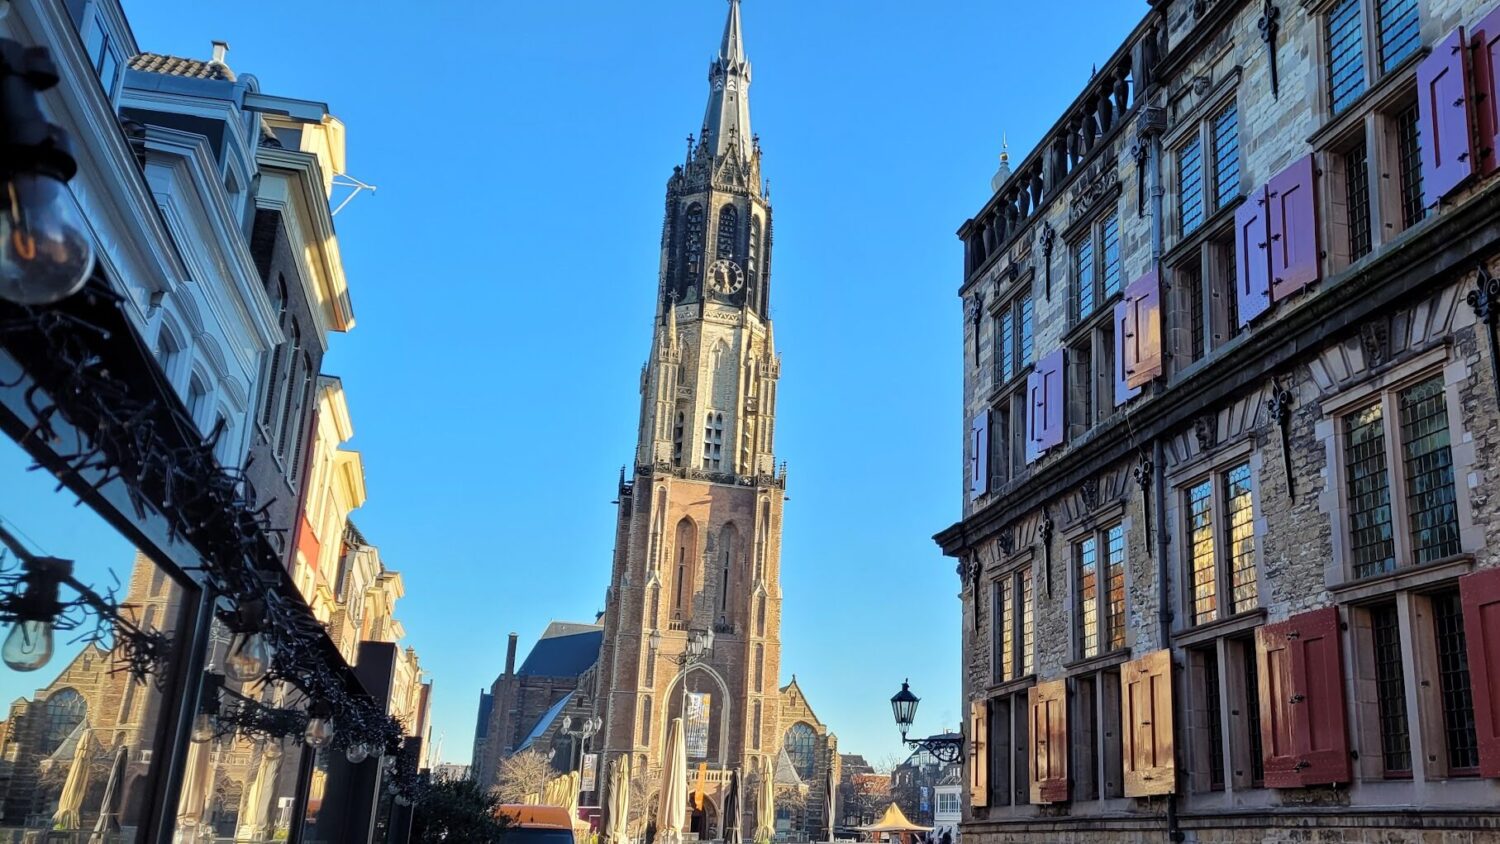 Delft's 'Nieuw Kerk' or New Church stands at one end of Delft Market Square with the beautiful 'Stadhuis' or City Hall dating to 1200 AD right.